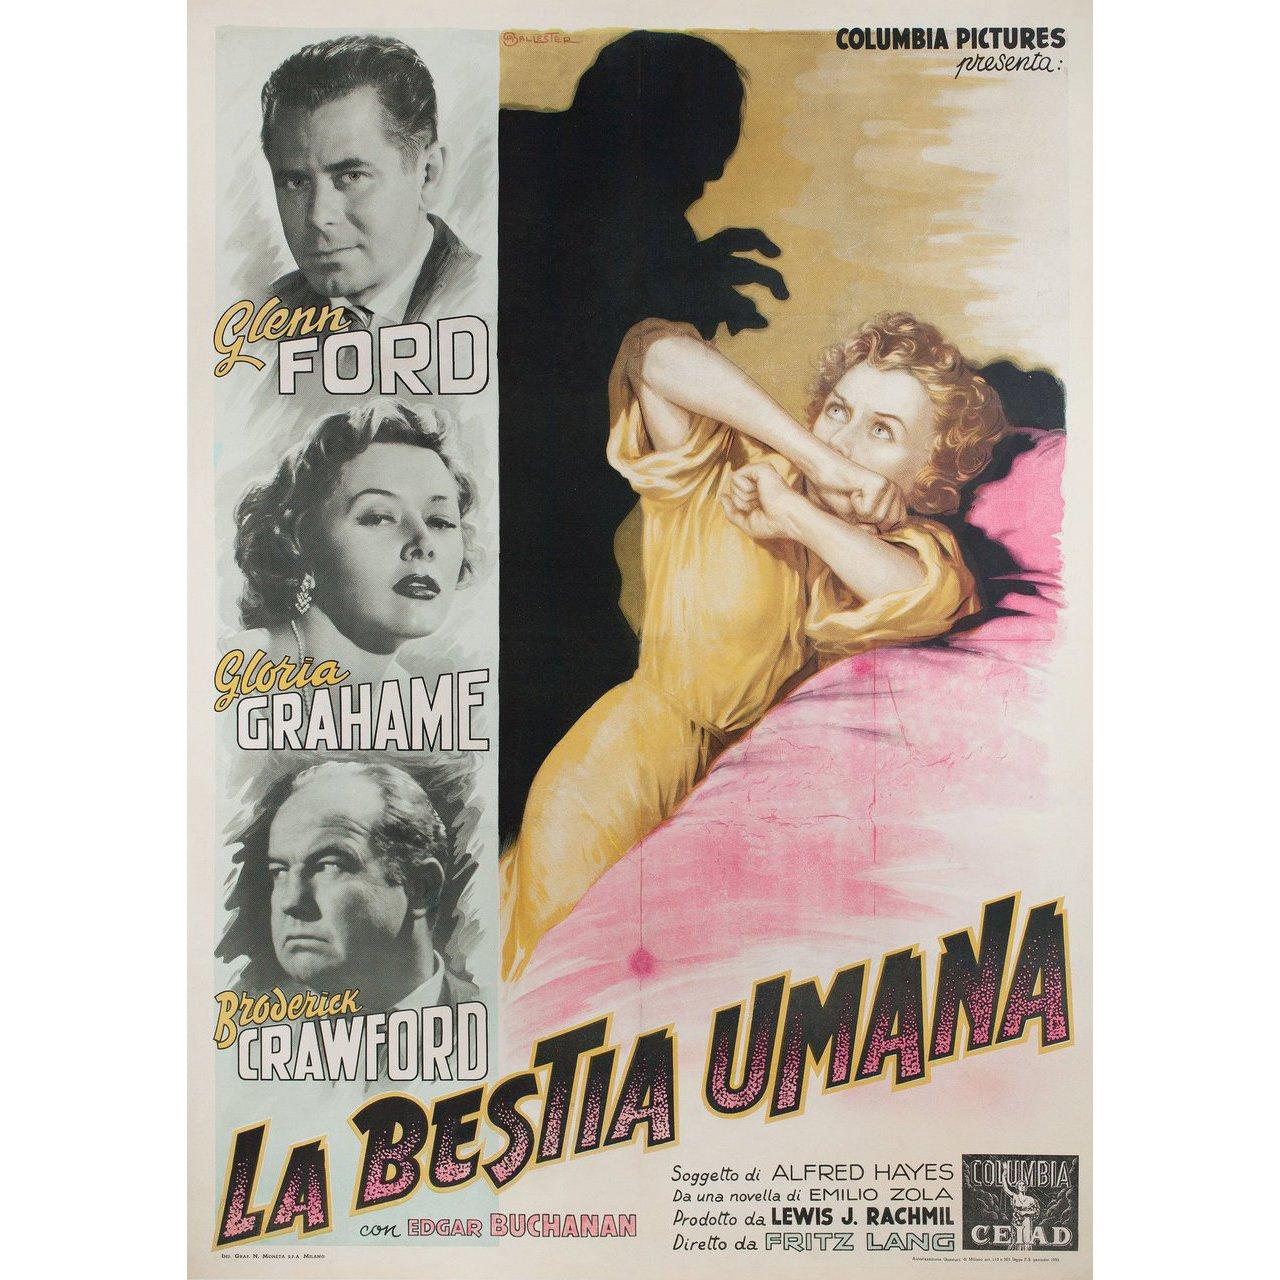 Original 1954 Italian due fogli poster by Anselmo Ballester for the film Human Desire directed by Fritz Lang with Glenn Ford / Gloria Grahame / Broderick Crawford / Edgar Buchanan. Very Good-Fine condition, linen-backed with color fading. This